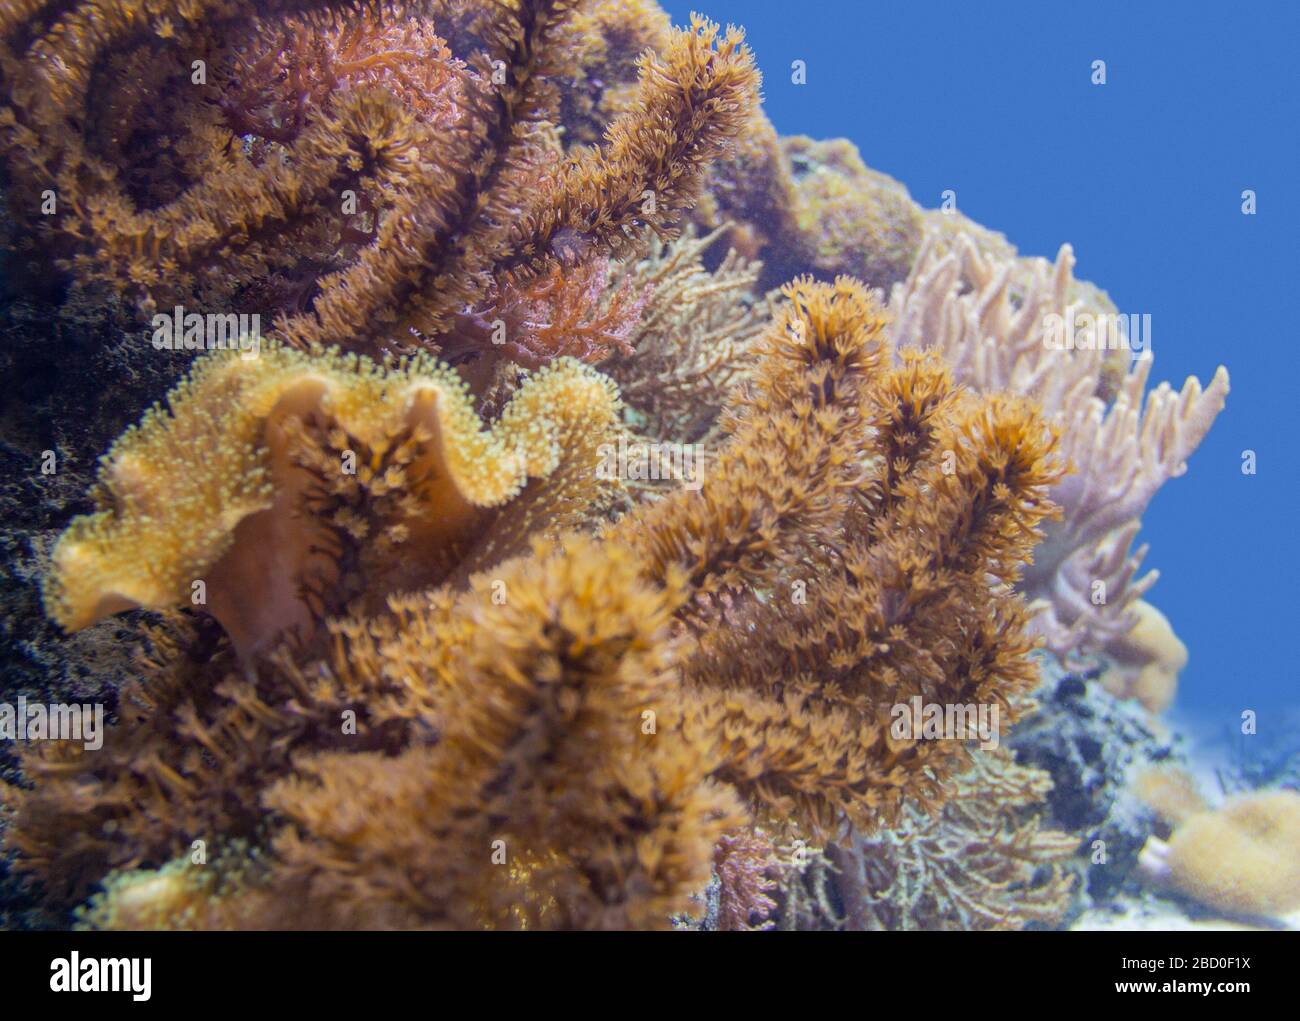 coral reef scenery with different corals and sea anemones Stock Photo